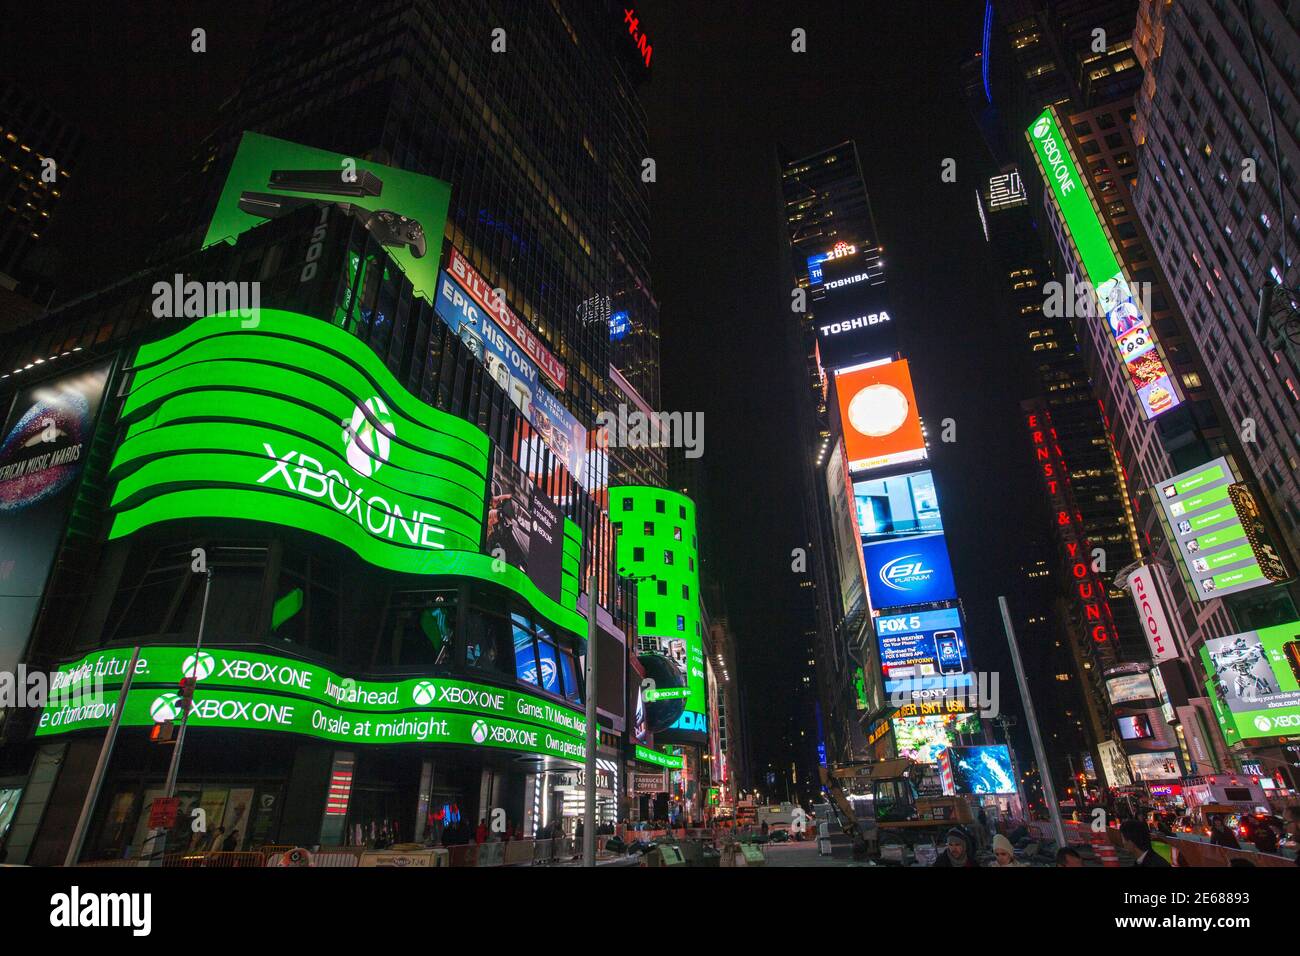 Screens display the Xbox One logo and images of the console in Times Square  before a midnight launch event in New York, November 21, 2013.  REUTERS/Lucas Jackson (UNITED STATES - Tags: ENTERTAINMENT